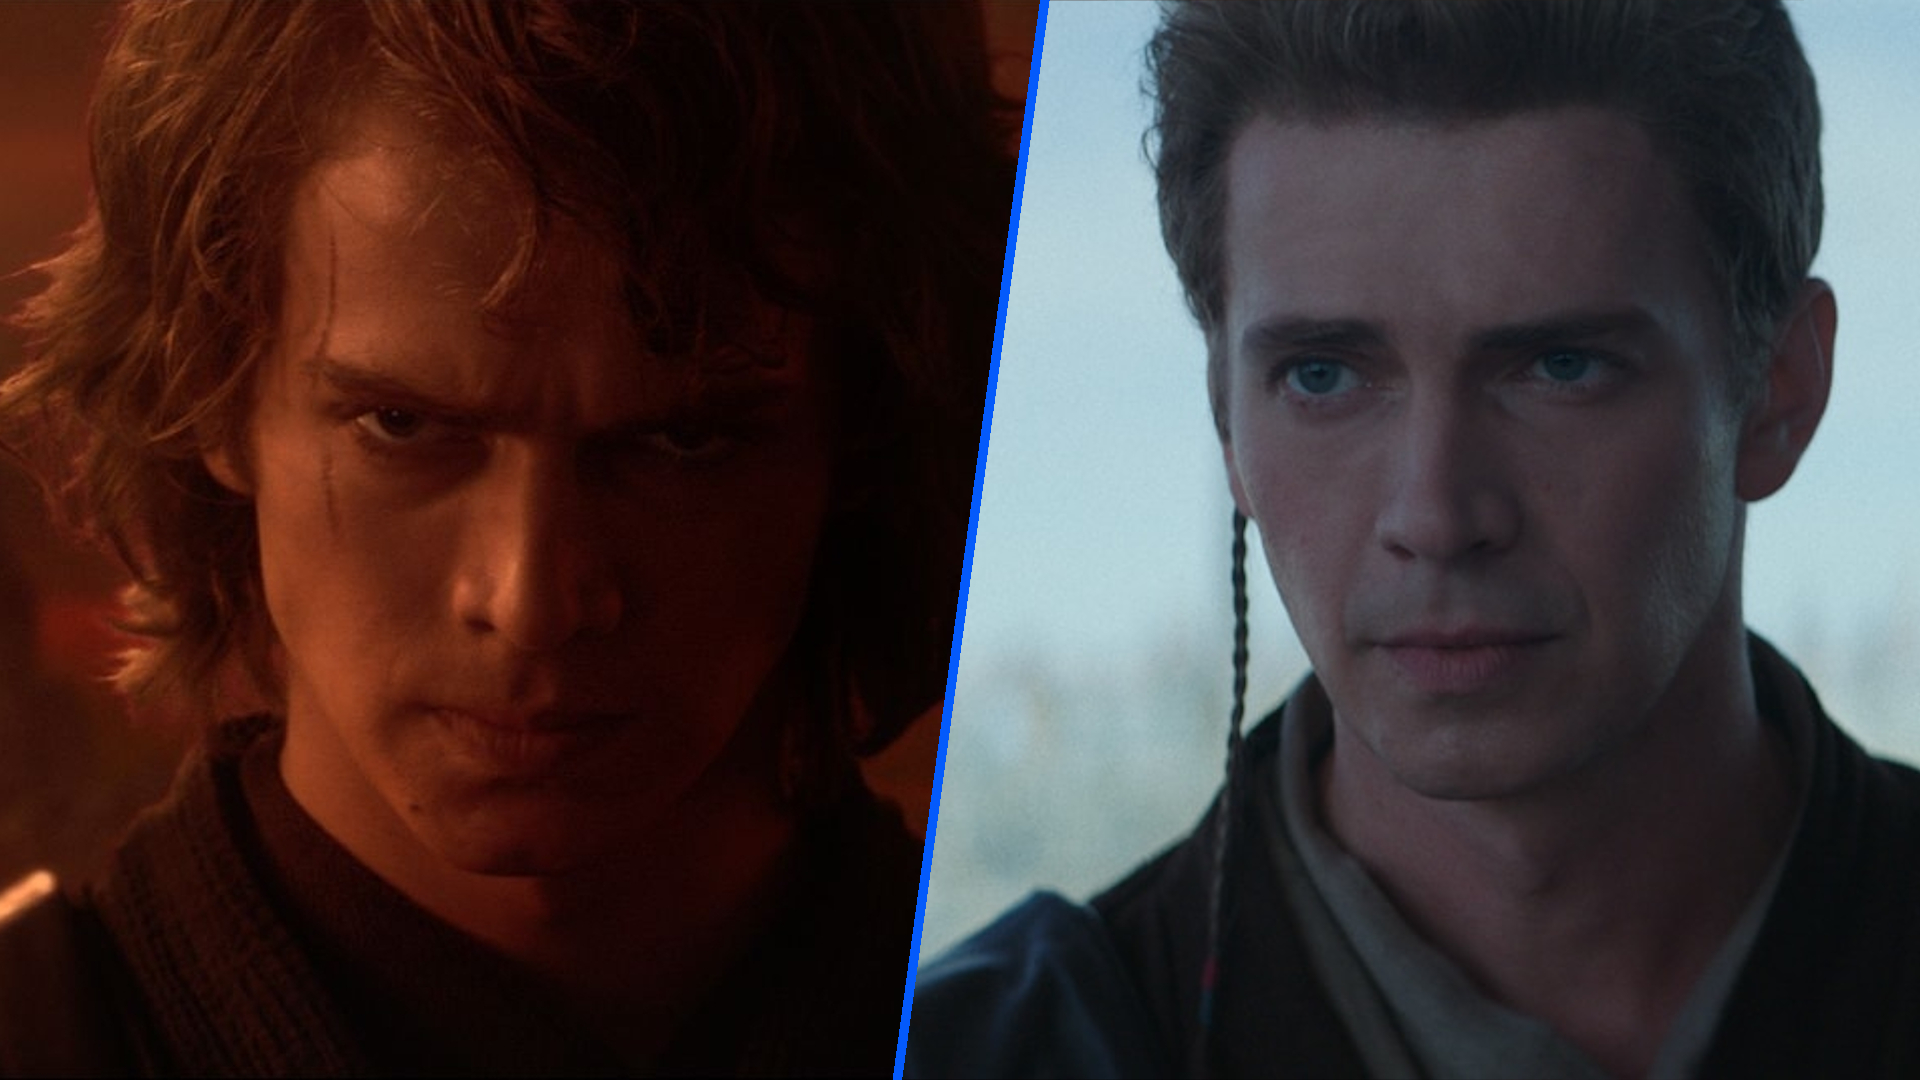 Star Wars Movie Franchise is Dying, But the TV Shows May Save It